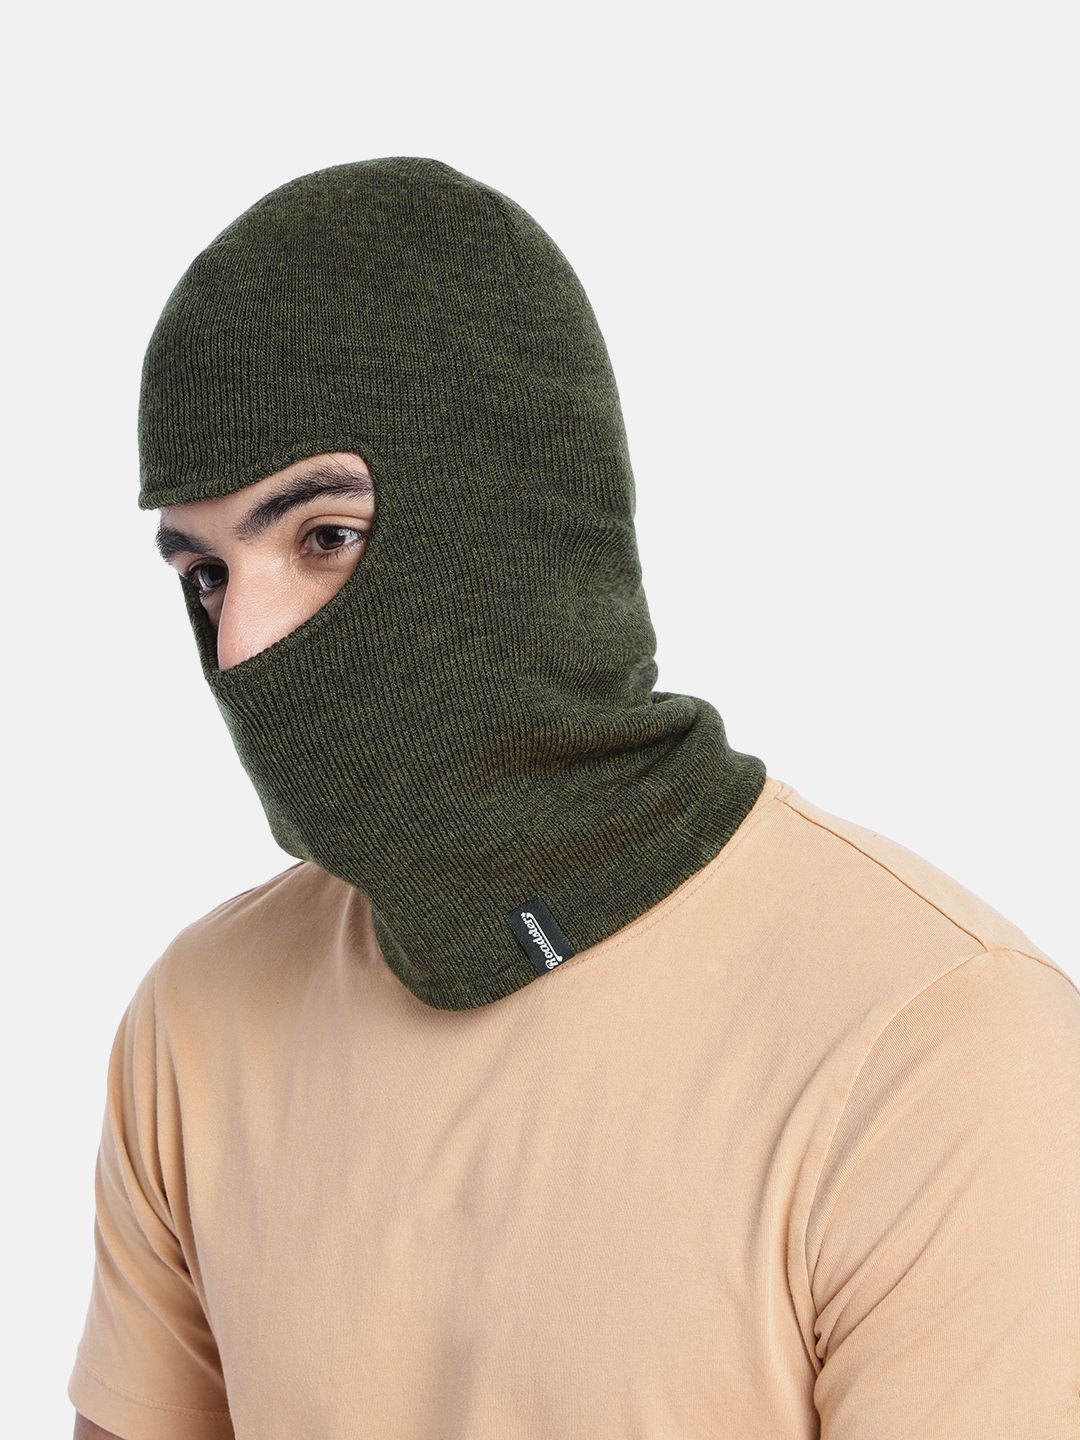 Roadster Unisex Green Solid Balaclava Price in India